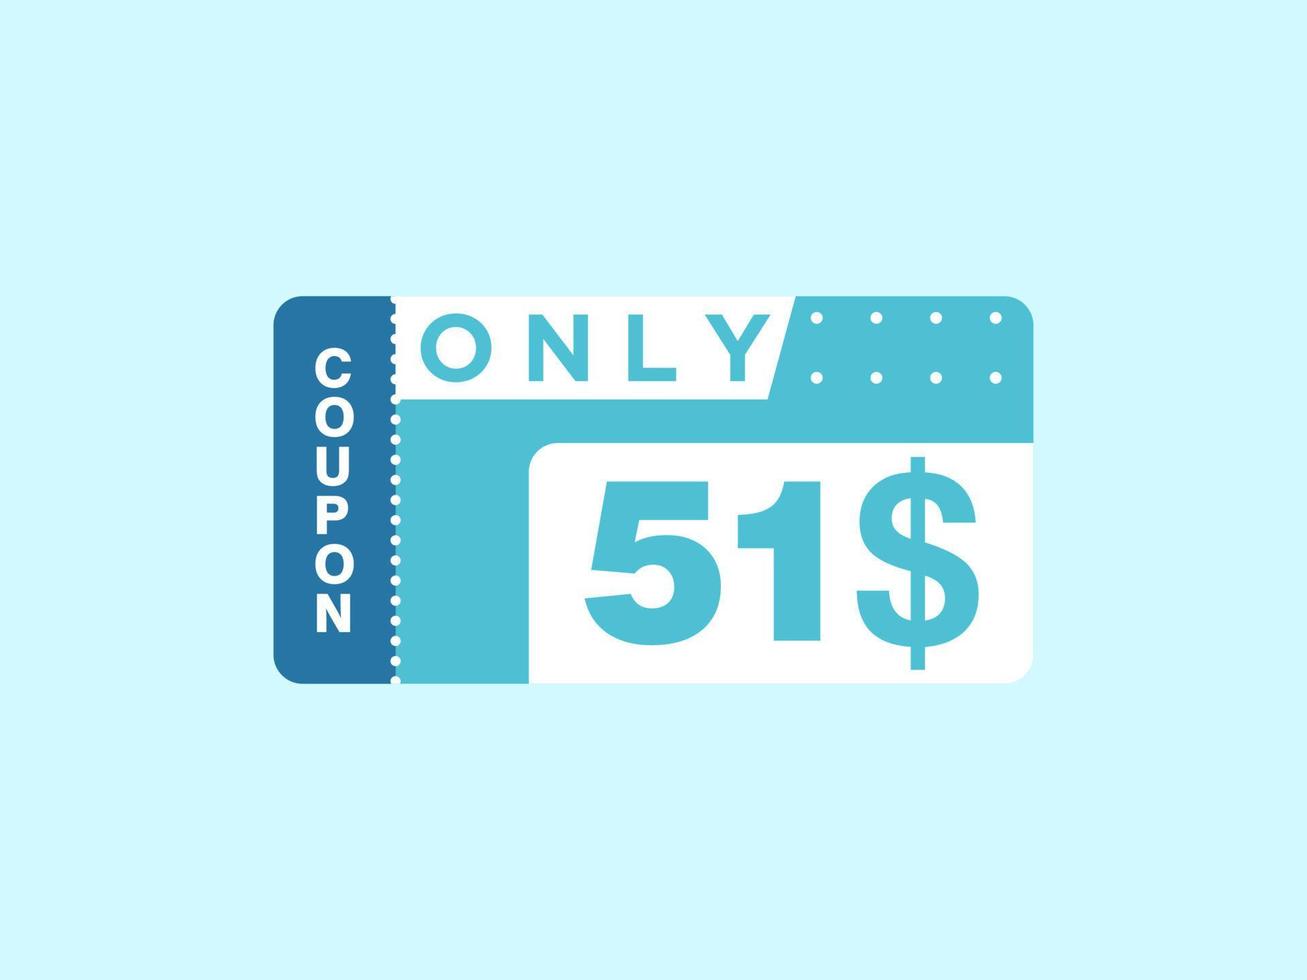 51 Dollar Only Coupon sign or Label or discount voucher Money Saving label, with coupon vector illustration summer offer ends weekend holiday